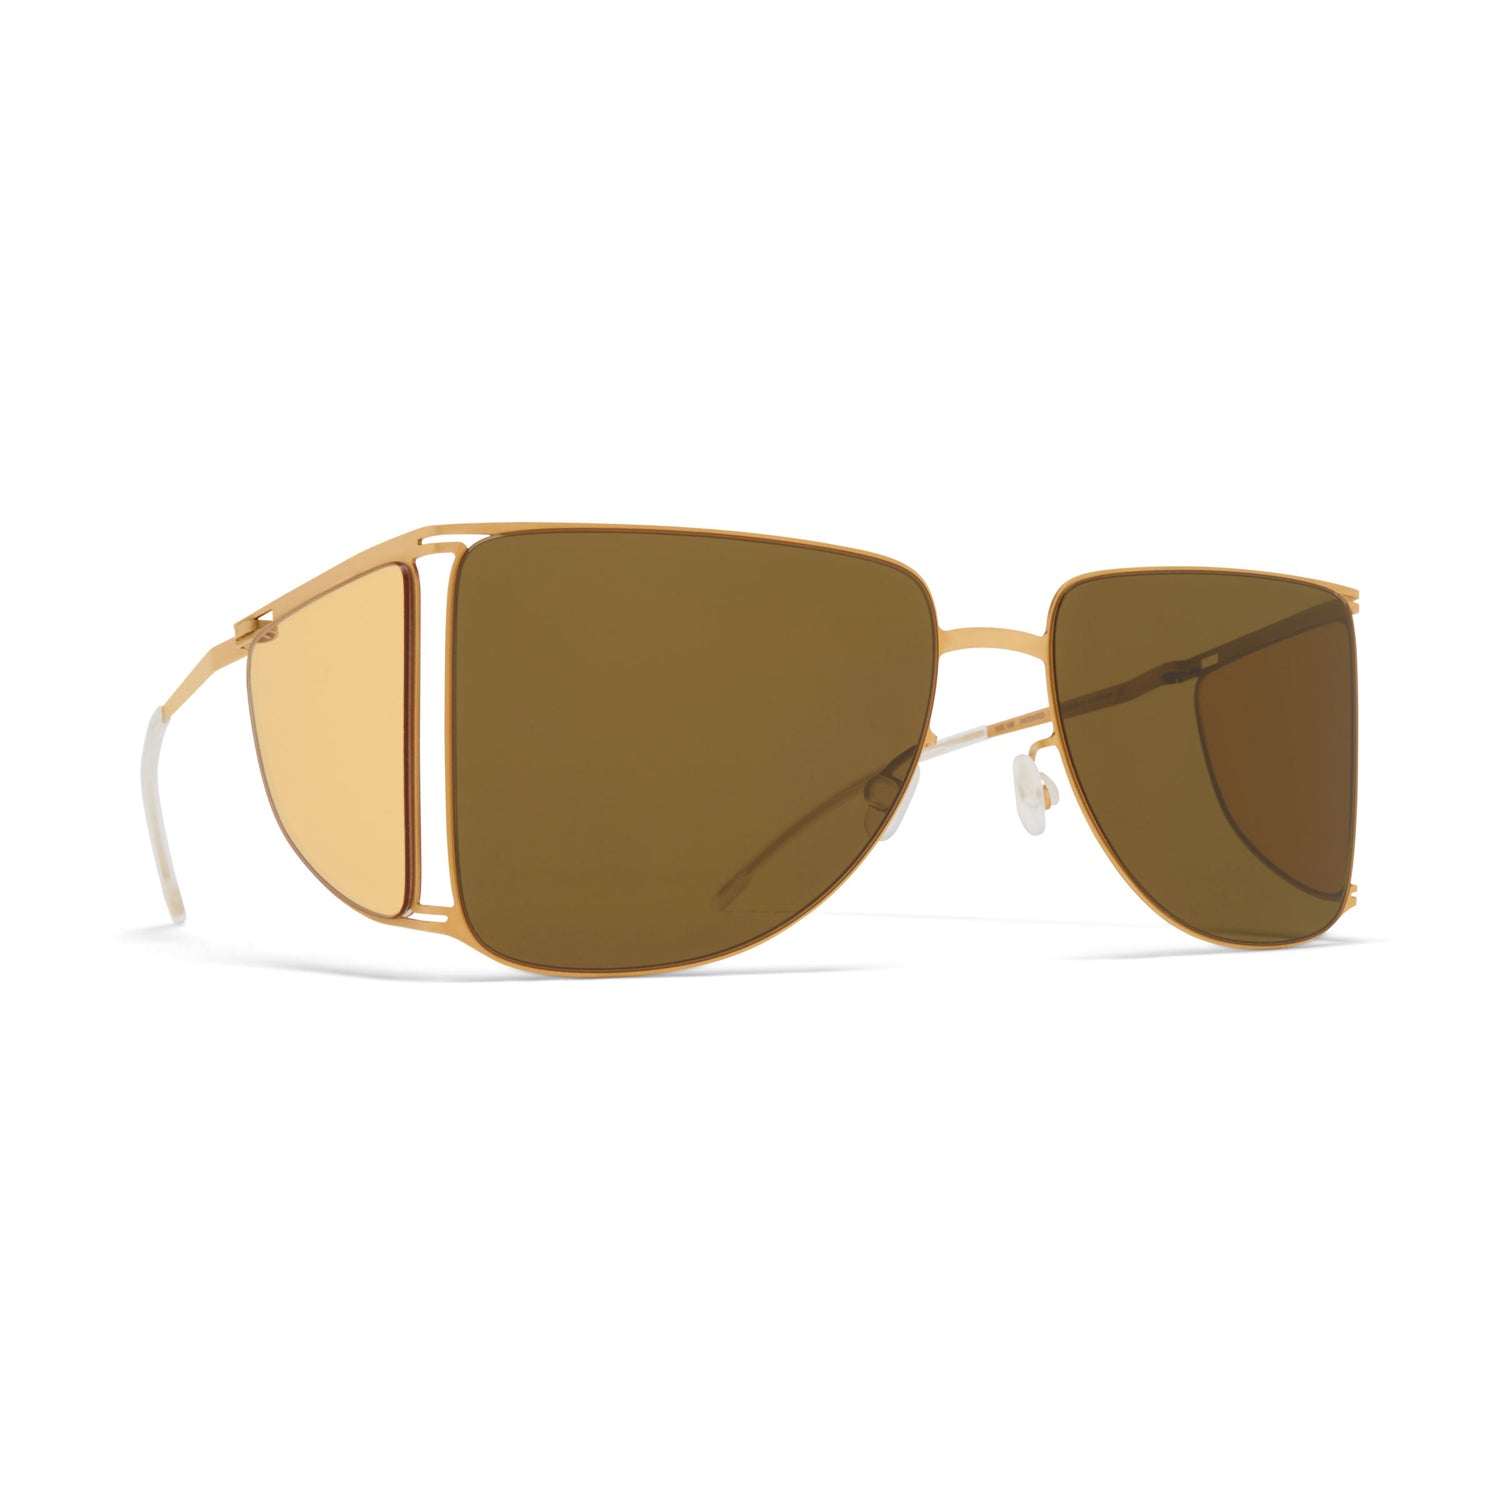 MYKITA x Helmut Lang // HL002 in Frosted Gold/Jelly Yellow Sides with Raw Brown Solid Lenses